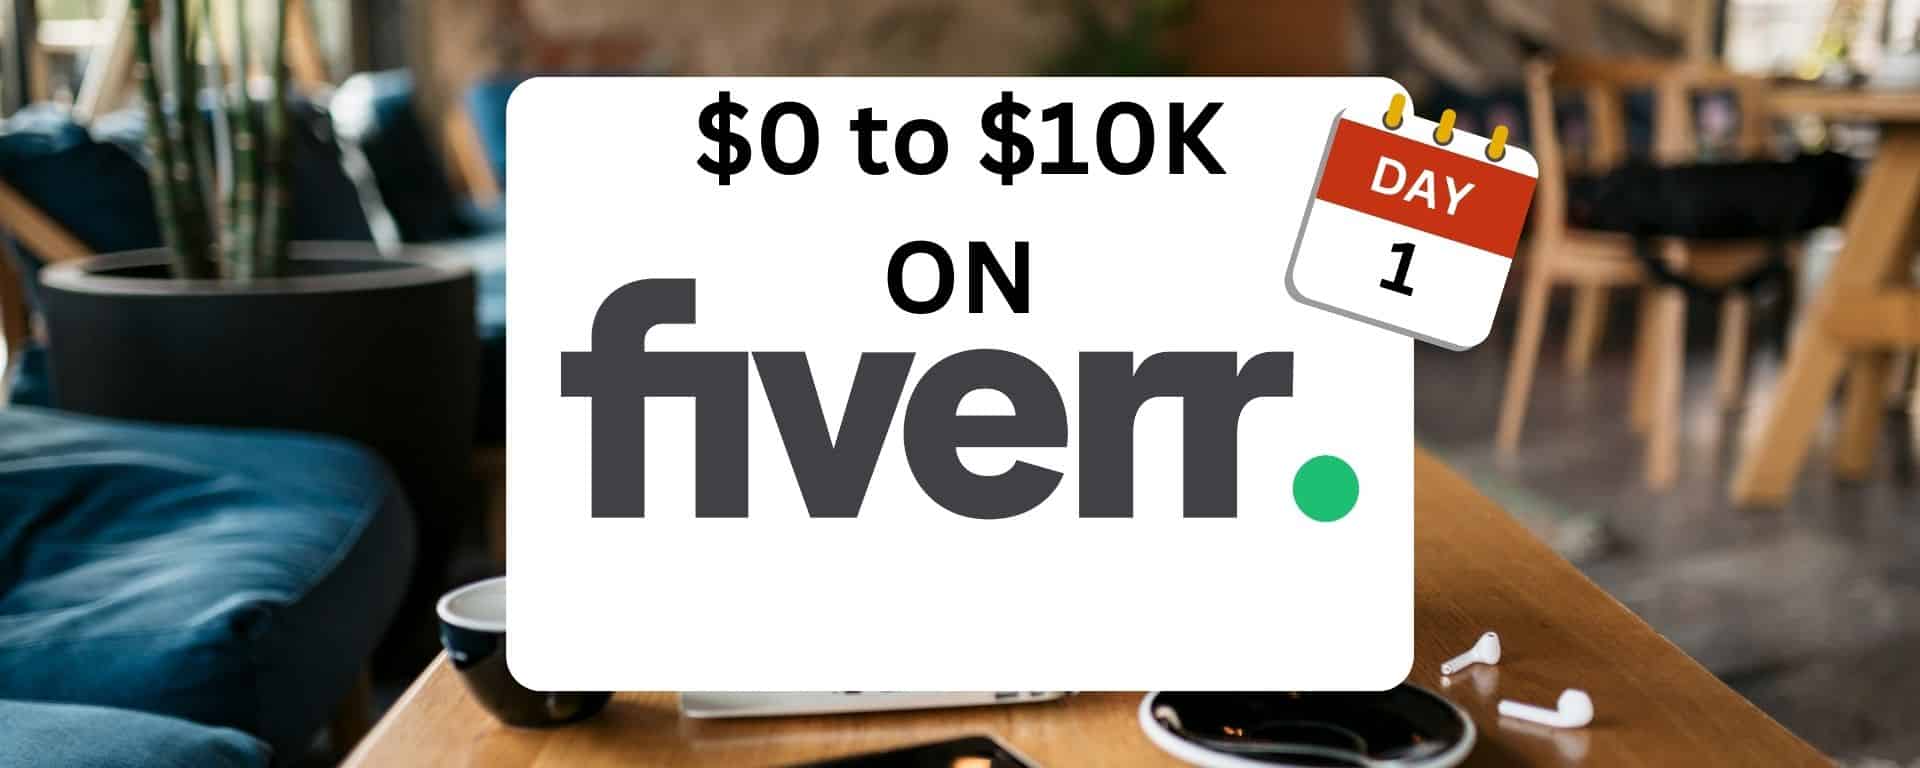 $0 to $10K on Fiverr - Day 1 R1